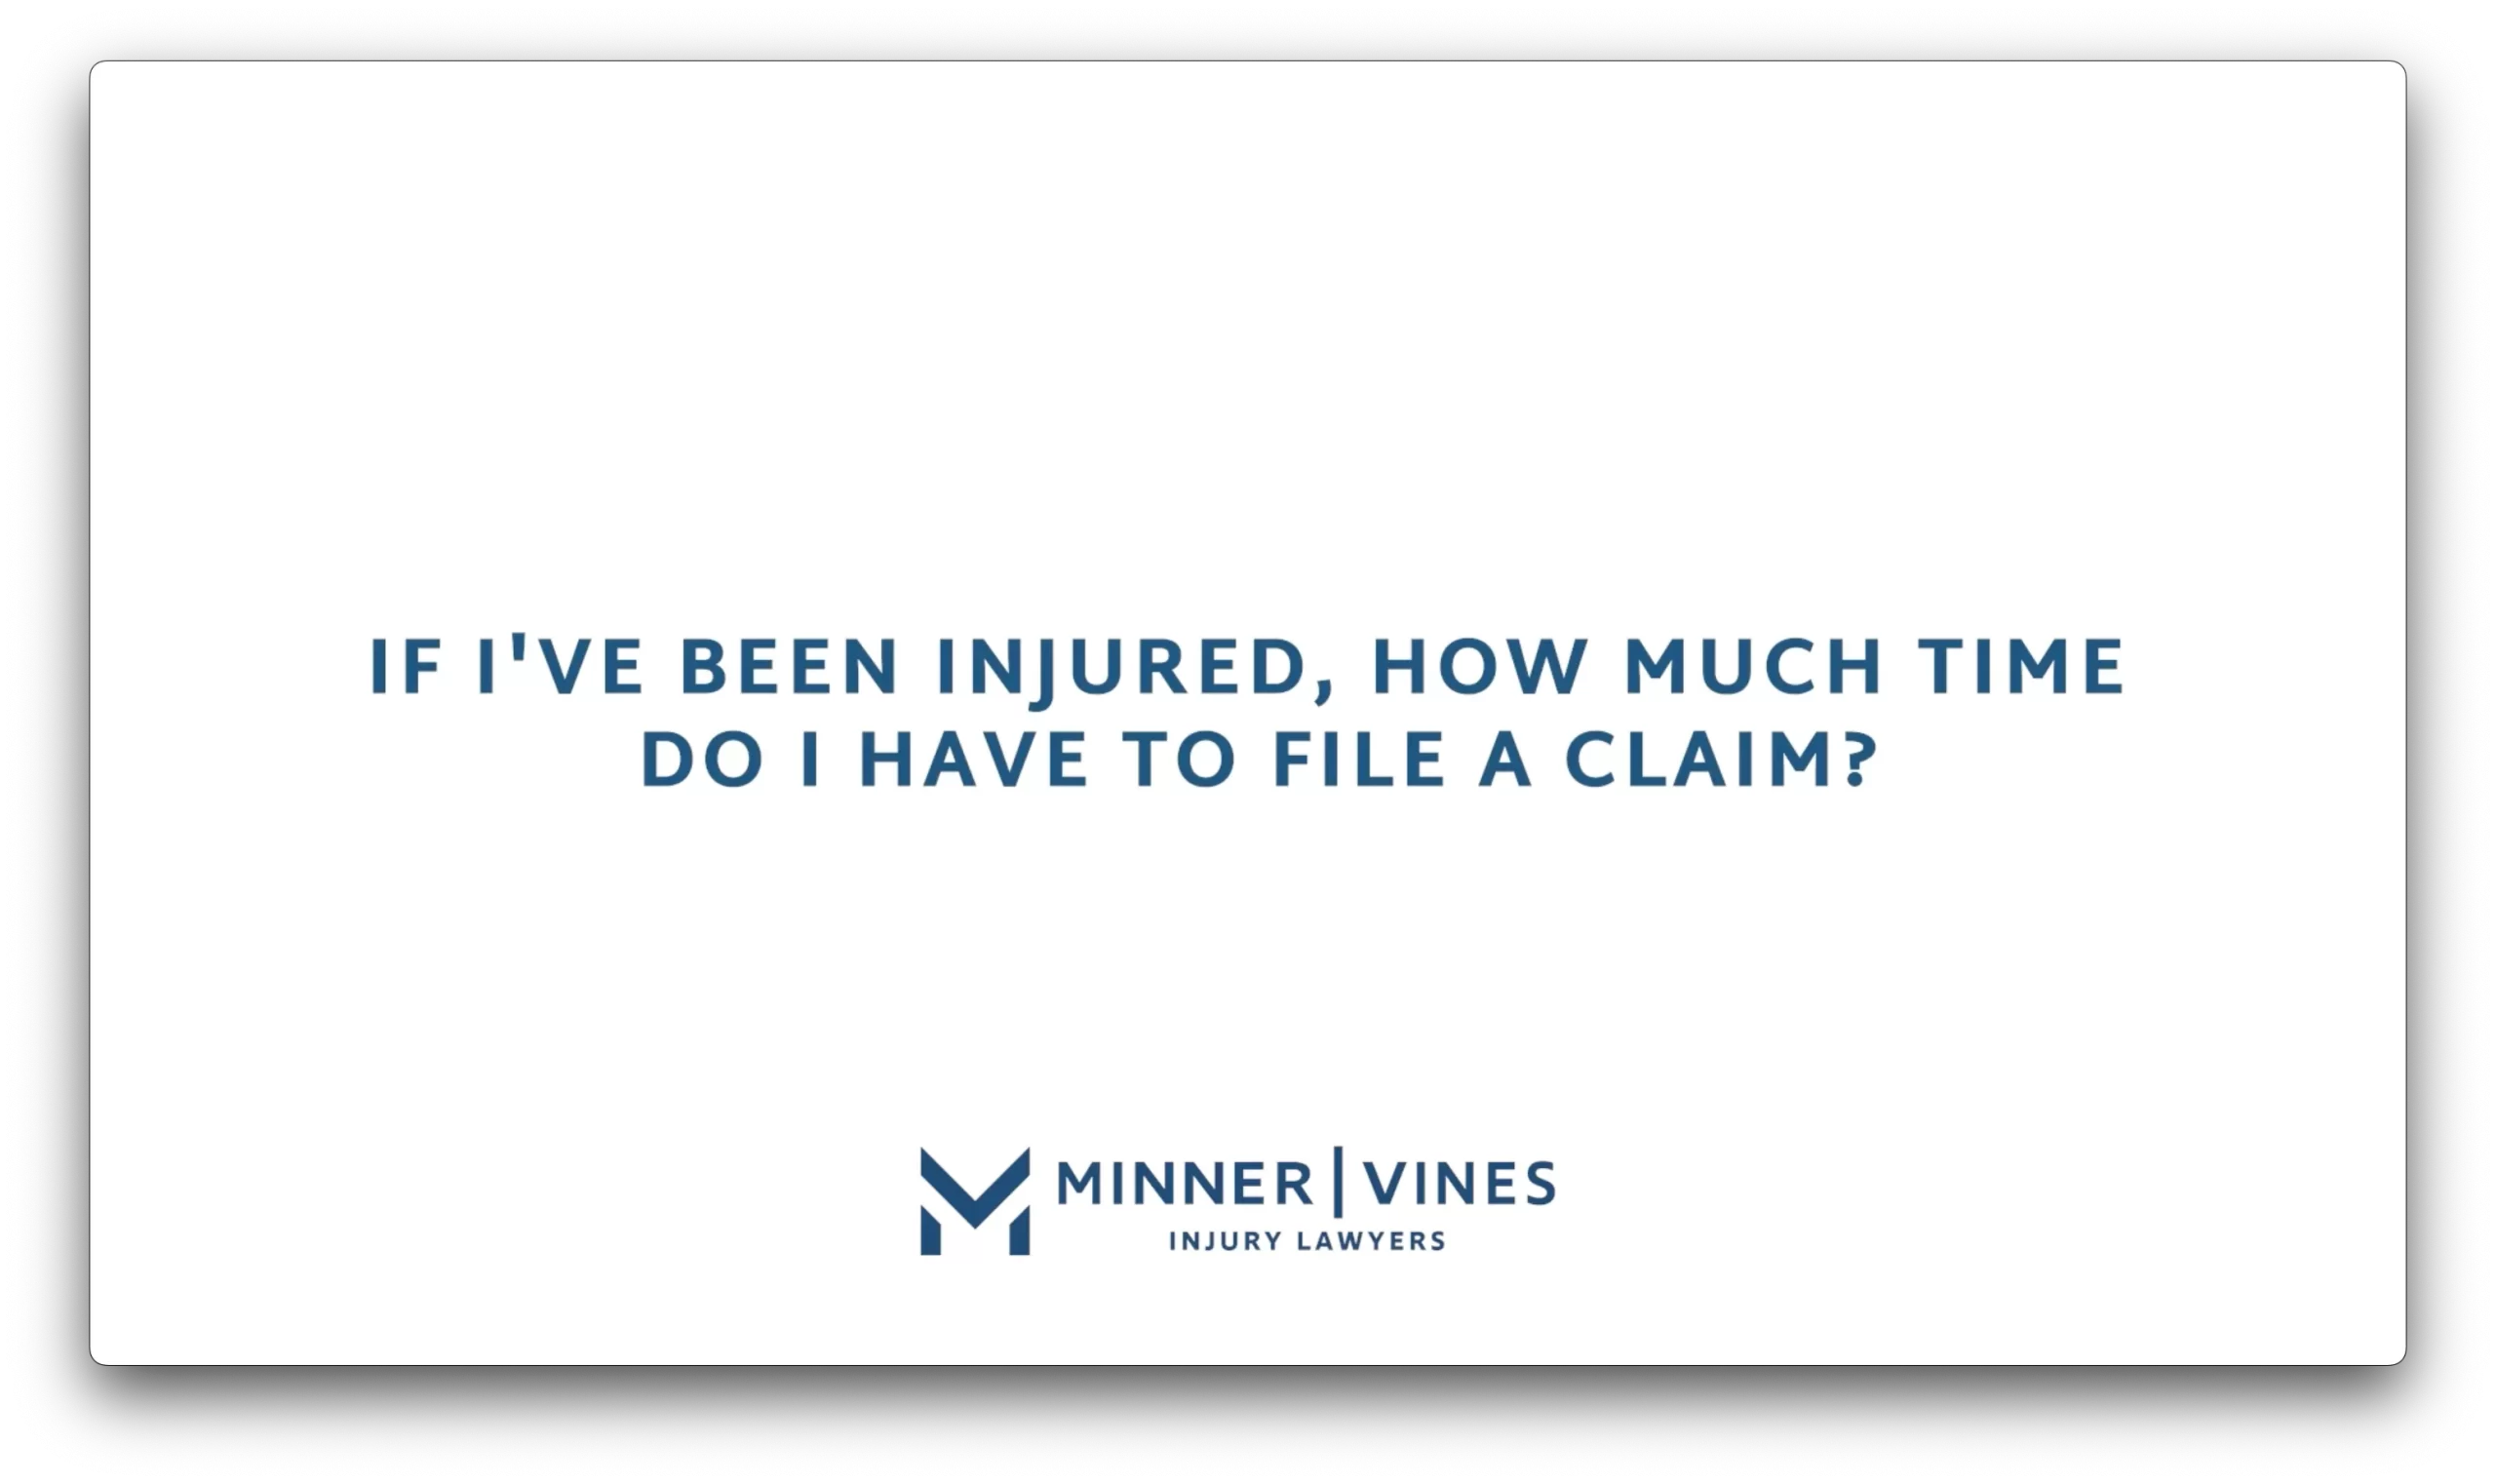 If I’ve been injured, how much time do I have to file a claim?